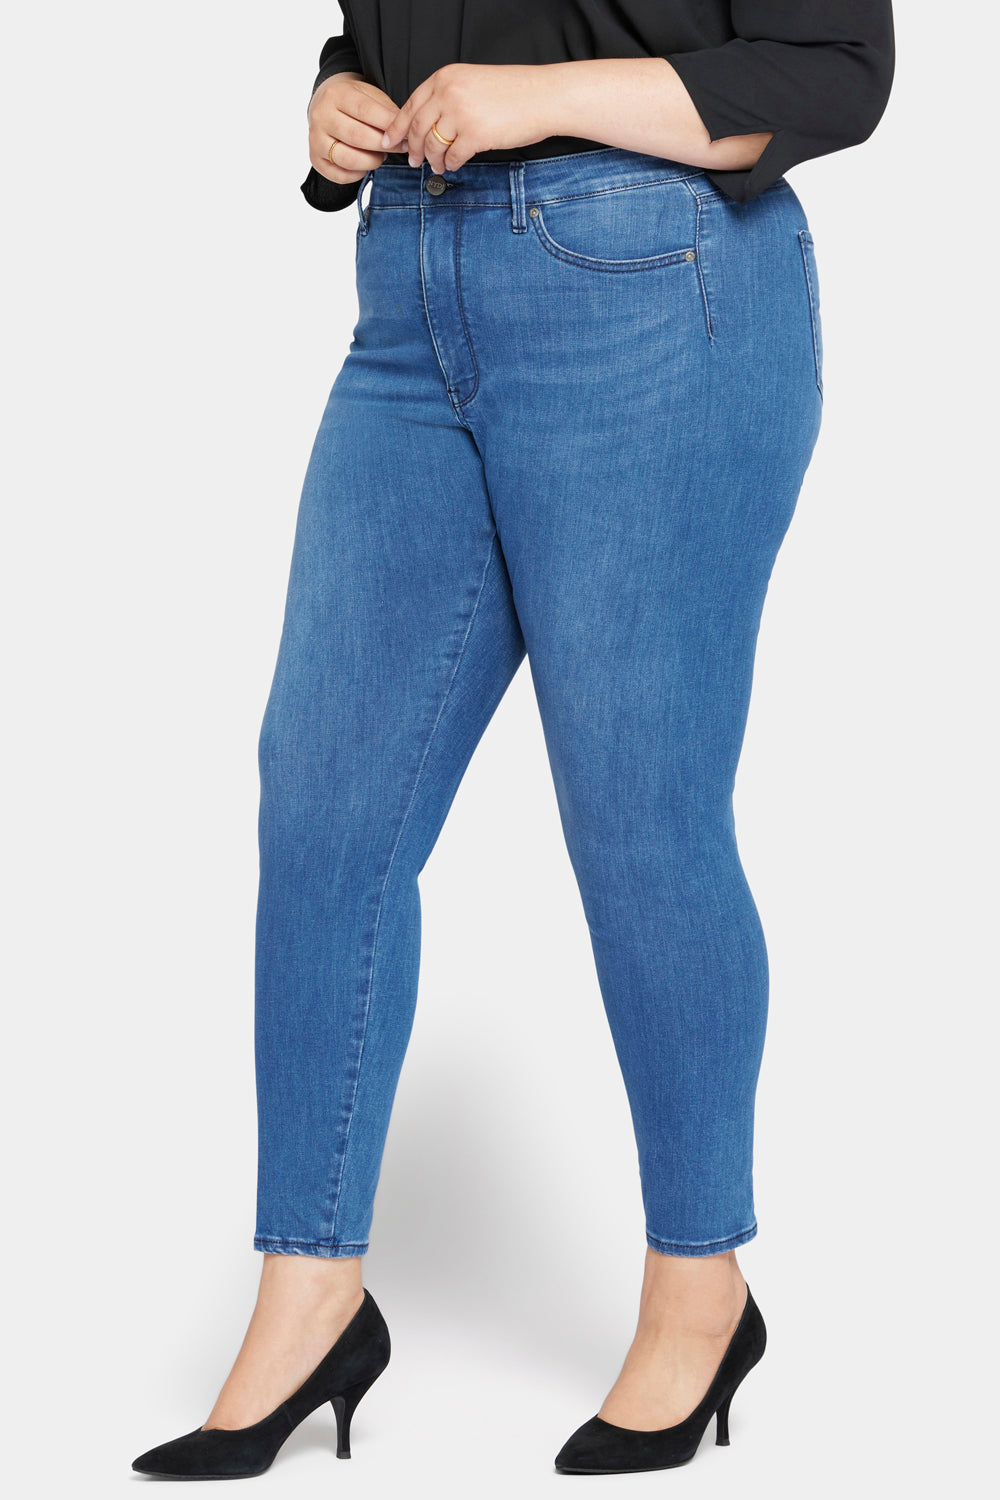 NYDJ Le Silhouette Ami Skinny Jeans In Plus Size With High Rise  - Amour